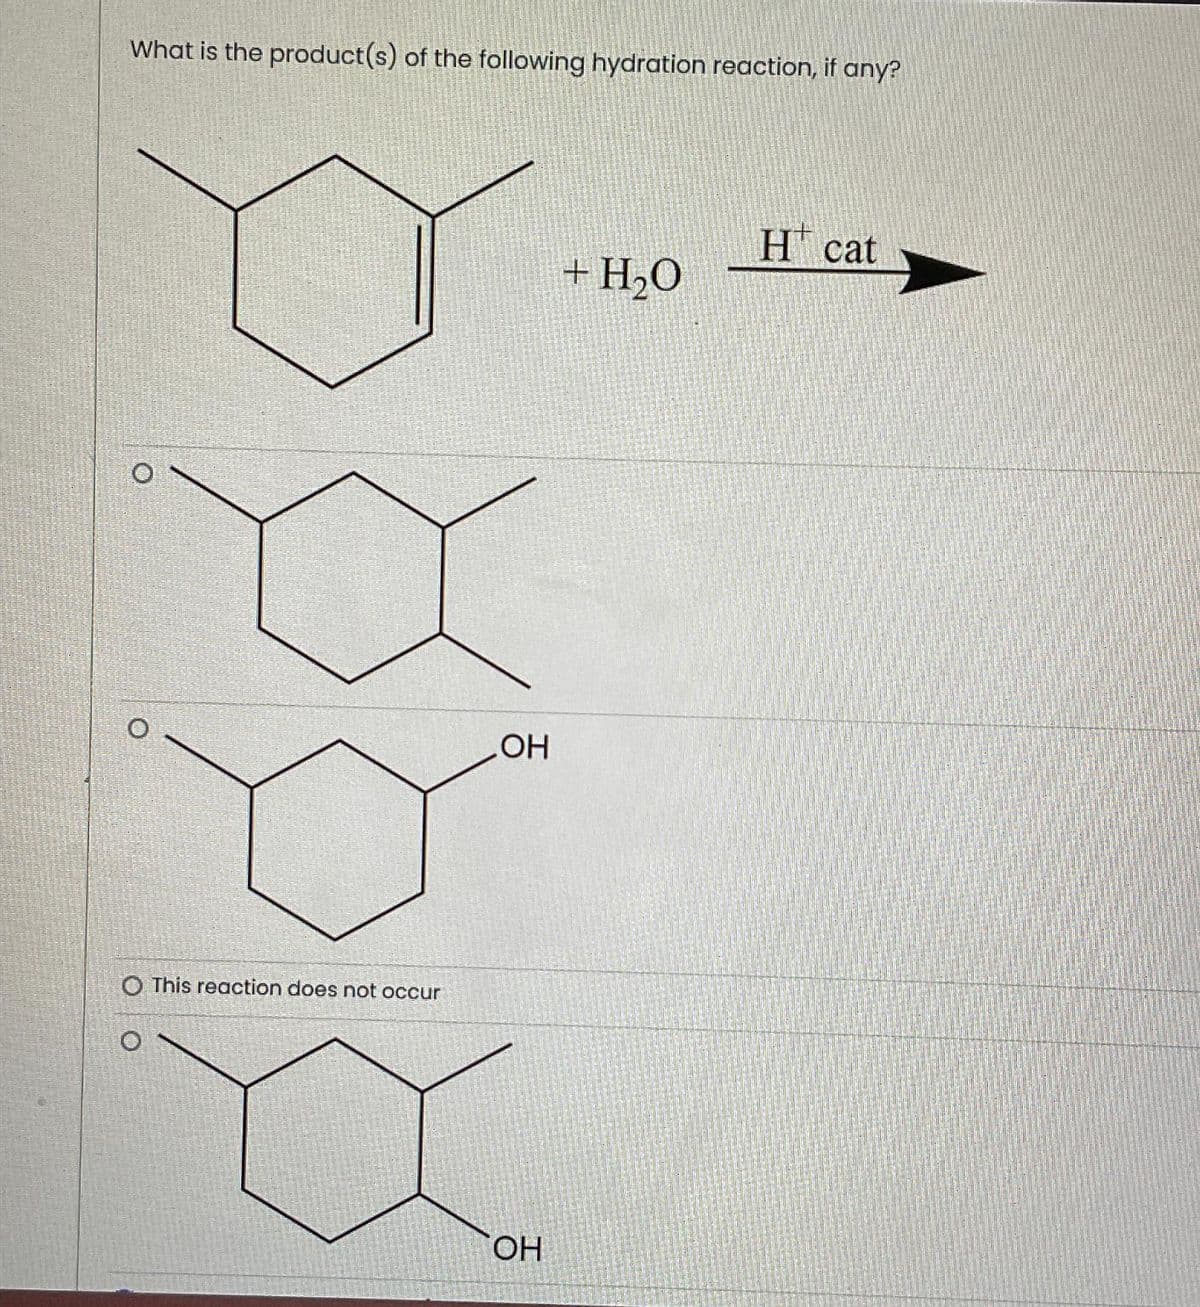 What is the product(s) of the following hydration reaction, if any?
O This reaction does not occur
.OH
OH
+ H₂O
H cat